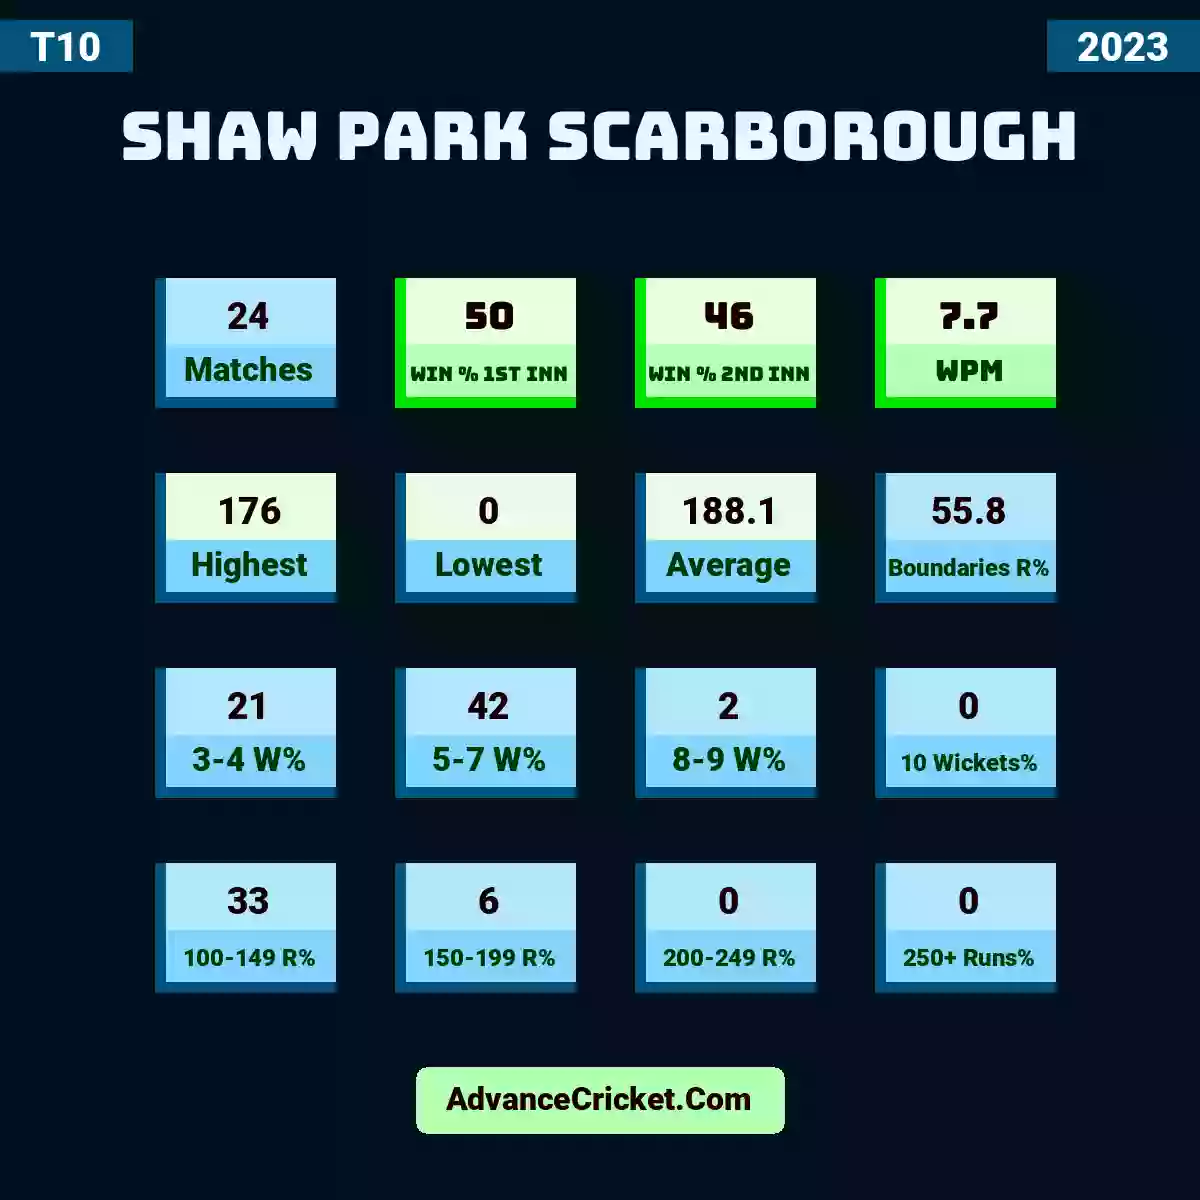 Image showing Shaw Park Scarborough with Matches: 24, Win % 1st Inn: 50, Win % 2nd Inn: 46, WPM: 7.7, Highest: 176, Lowest: 0, Average: 188.1, Boundaries R%: 55.8, 3-4 W%: 21, 5-7 W%: 42, 8-9 W%: 2, 10 Wickets%: 0, 100-149 R%: 33, 150-199 R%: 6, 200-249 R%: 0, 250+ Runs%: 0.